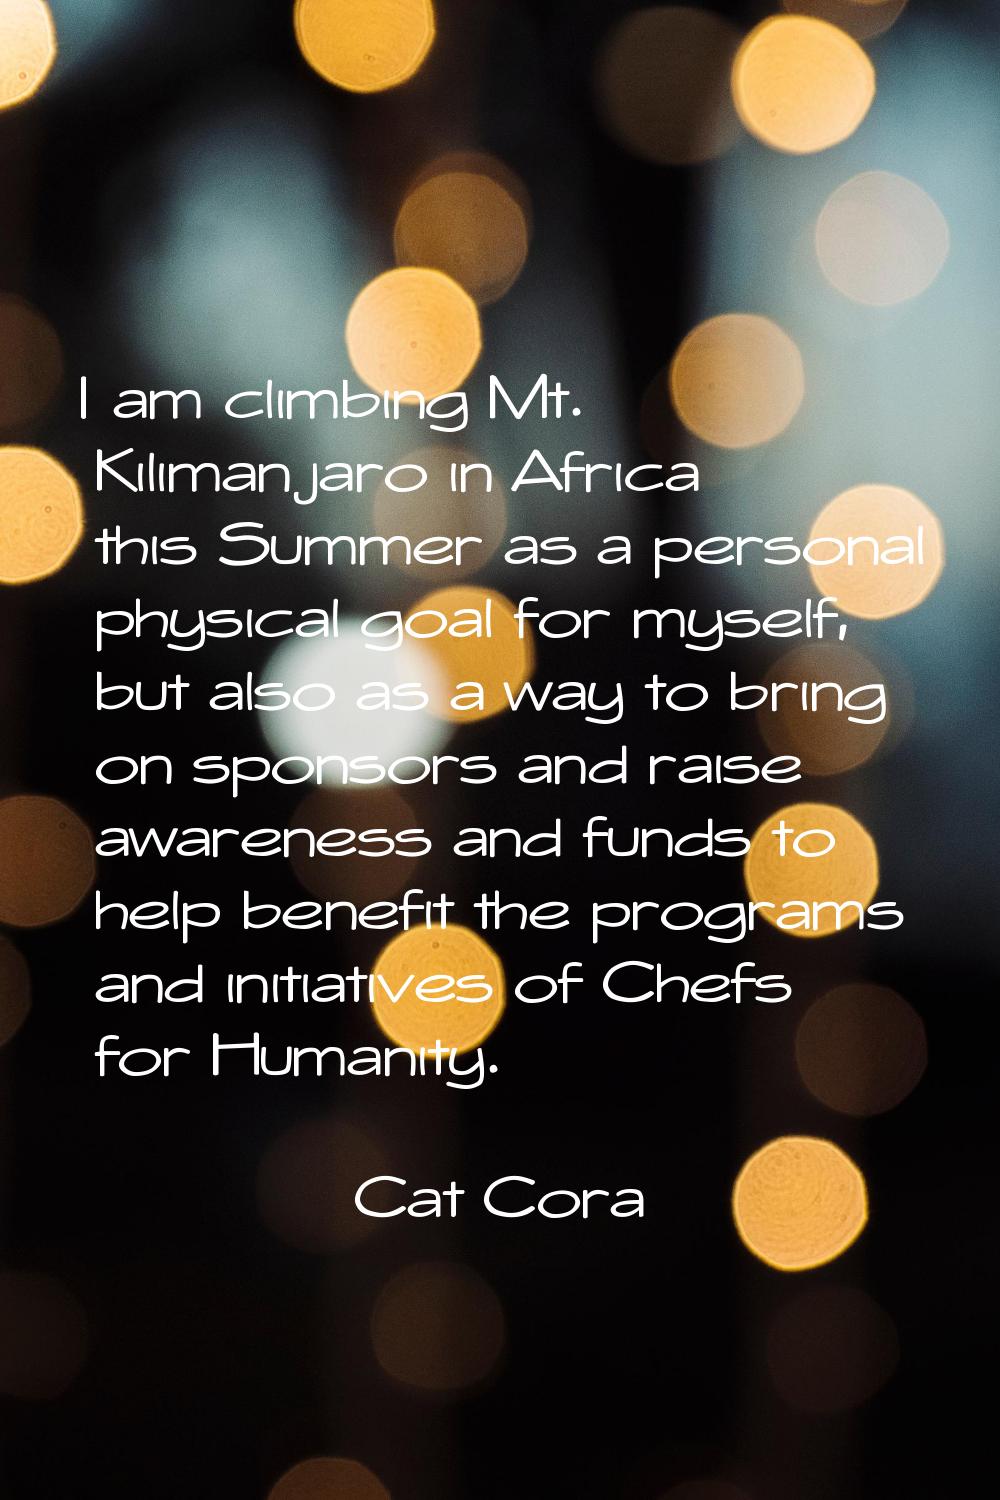 I am climbing Mt. Kilimanjaro in Africa this Summer as a personal physical goal for myself, but als